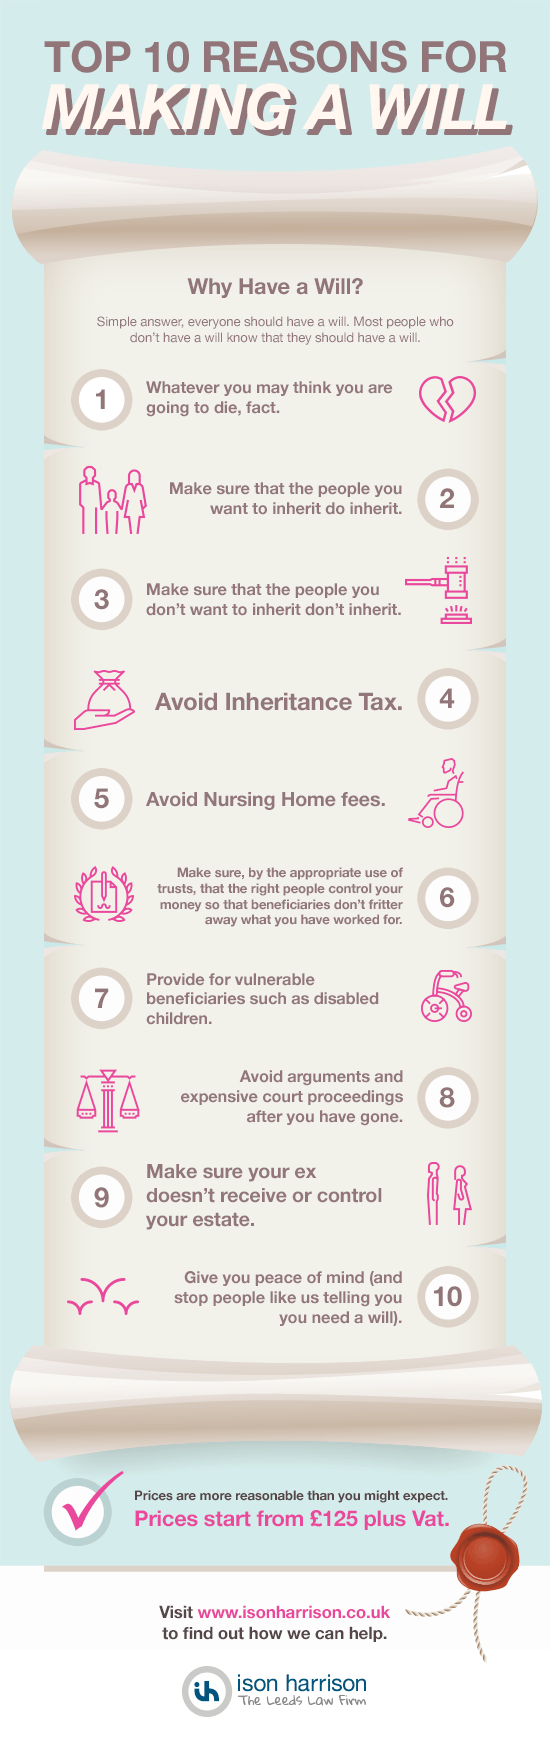 Top 10 reasons for making a will infographic